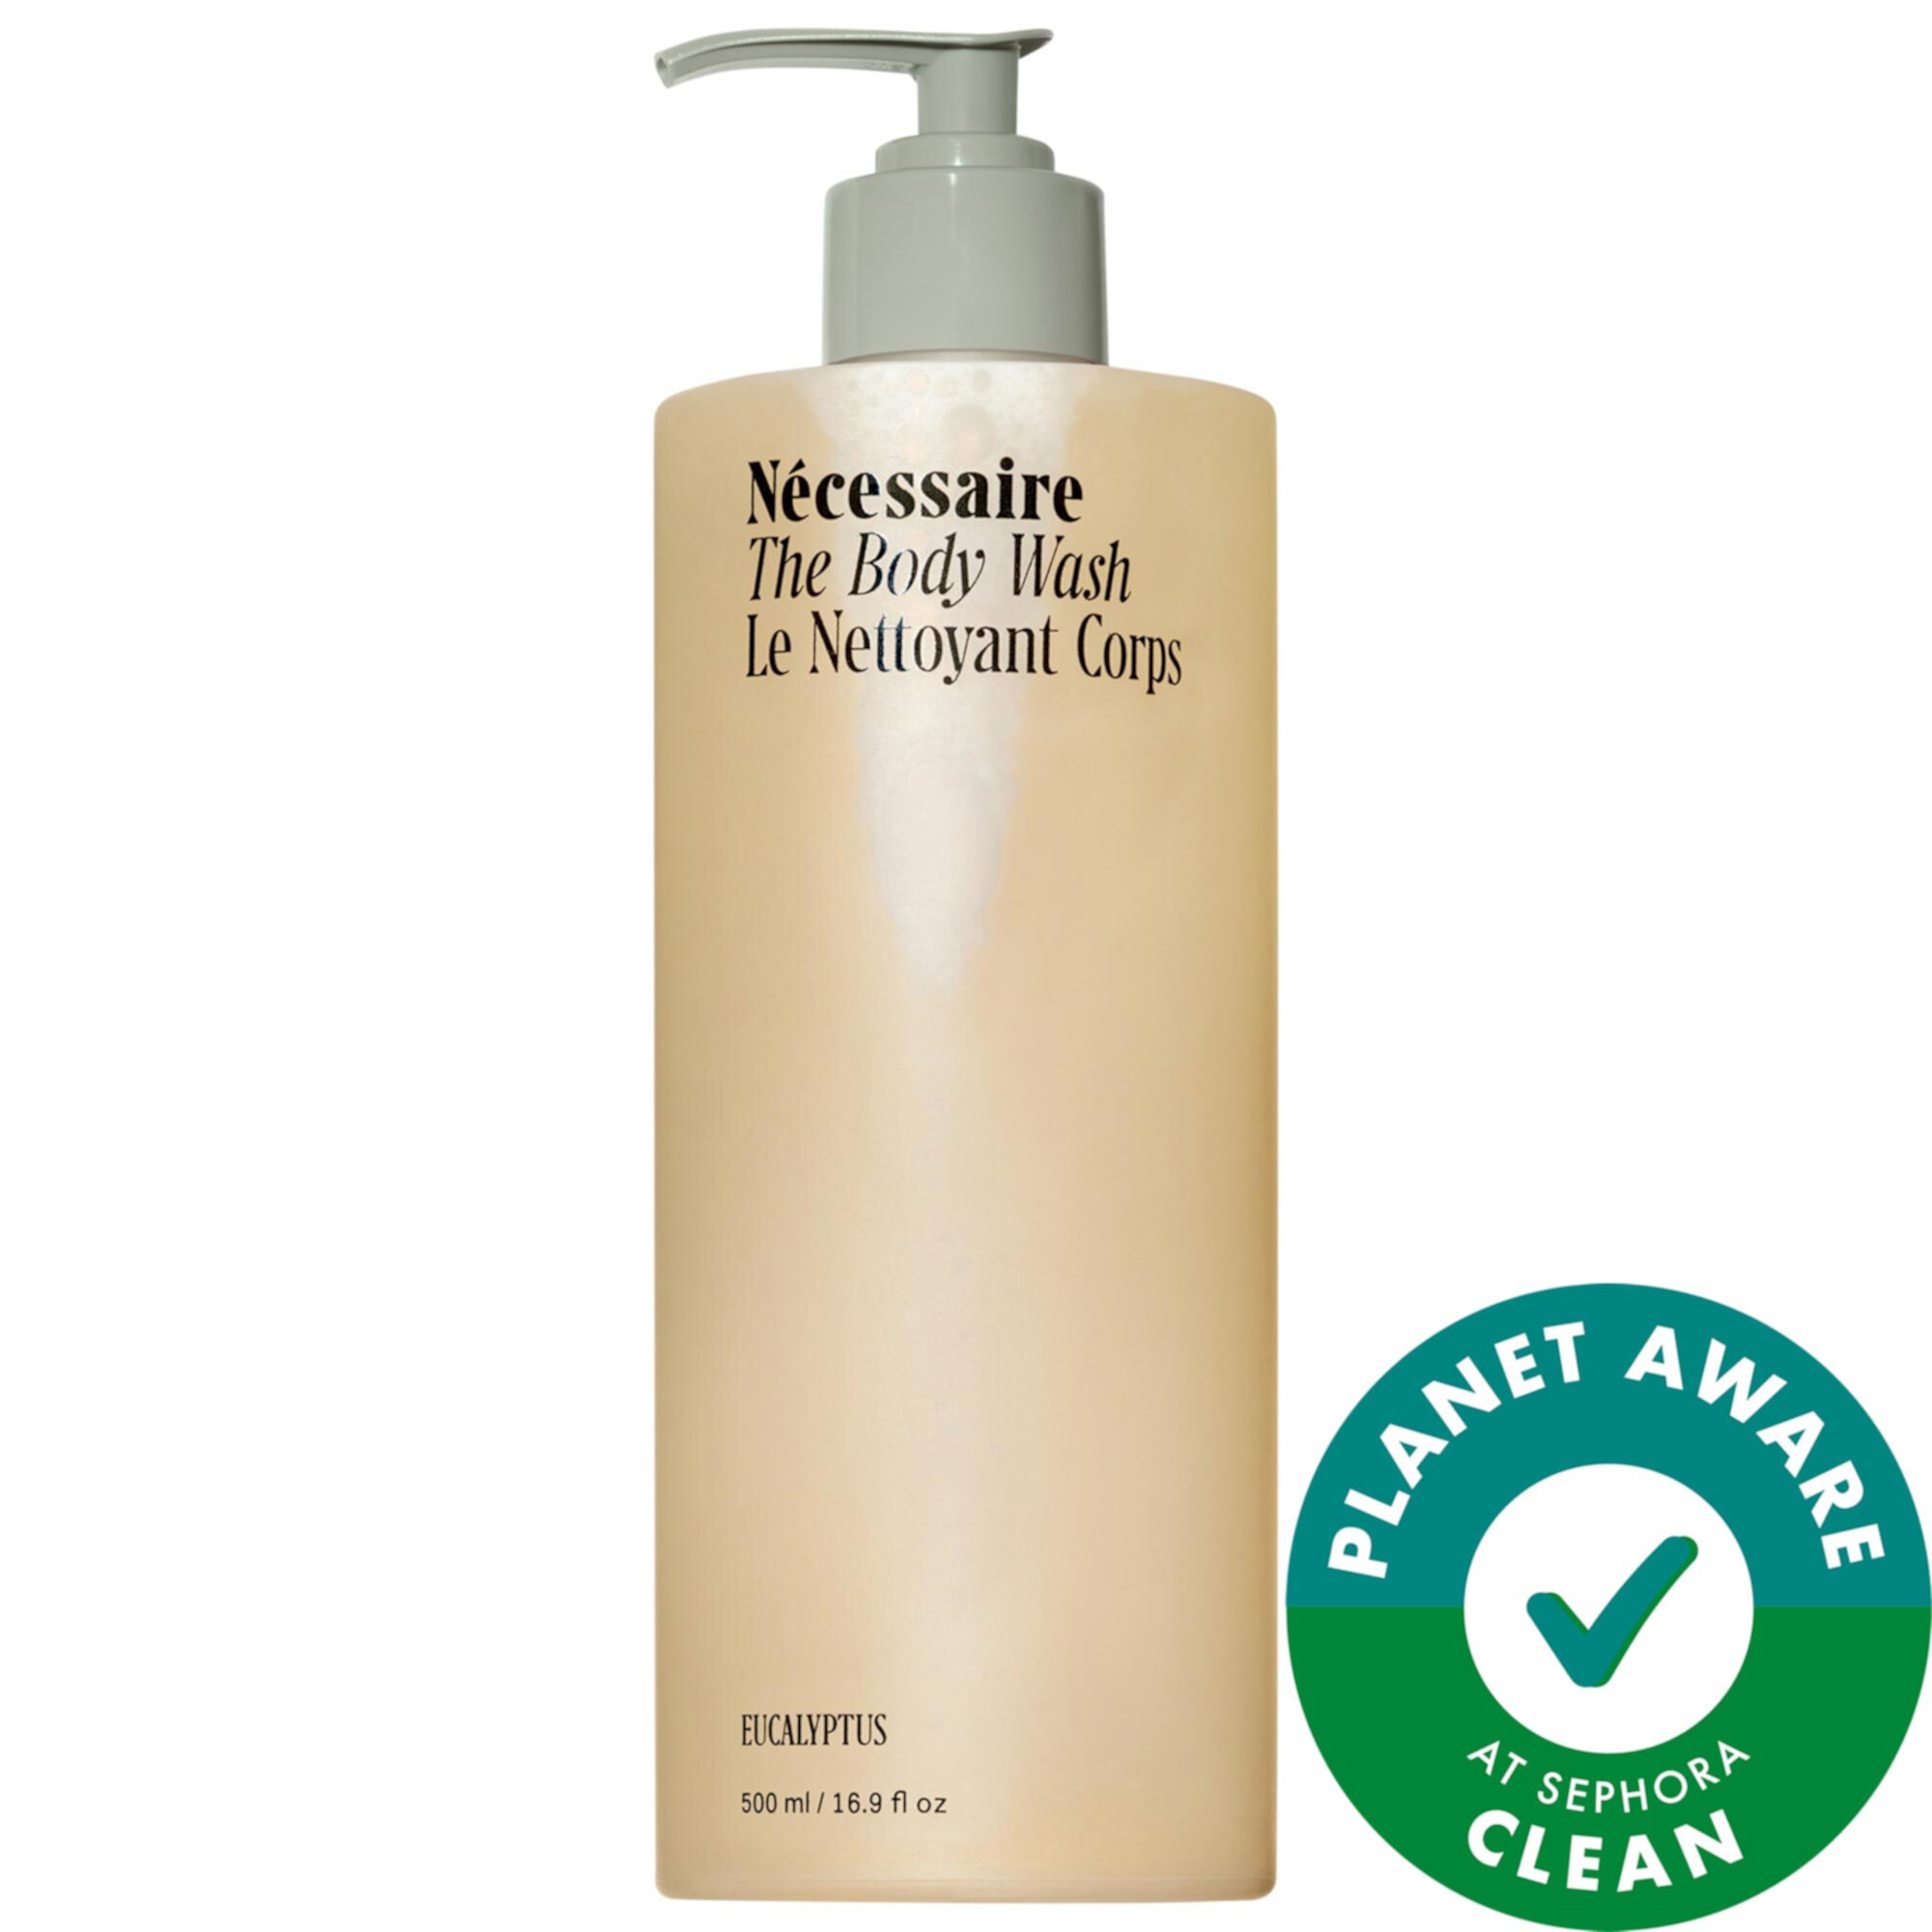 The Body Wash Eucalyptus - Nourishing Treatment Cleanse With Lipid-Rich Oils + Niacinamide with Pump Nécessaire